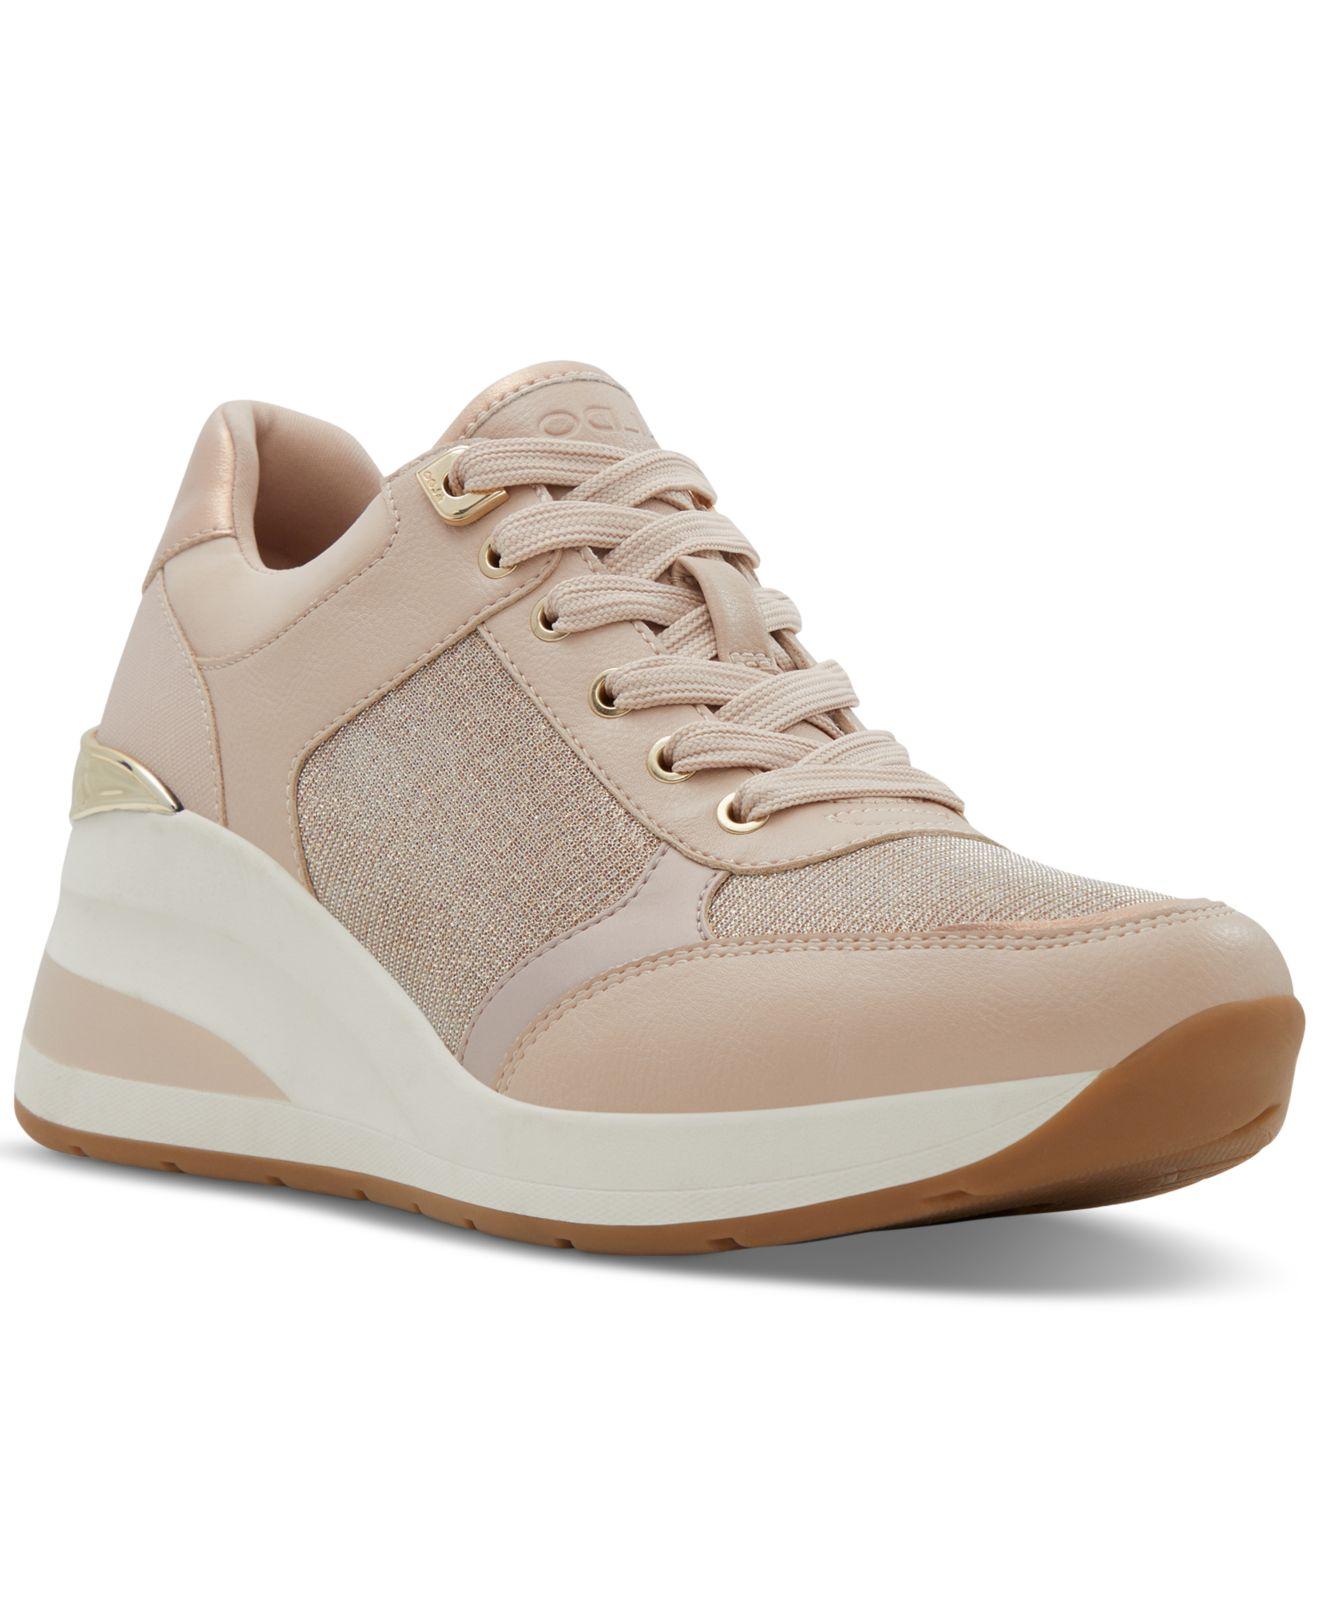 ALDO Iconistep Wedge Sneakers in | Lyst